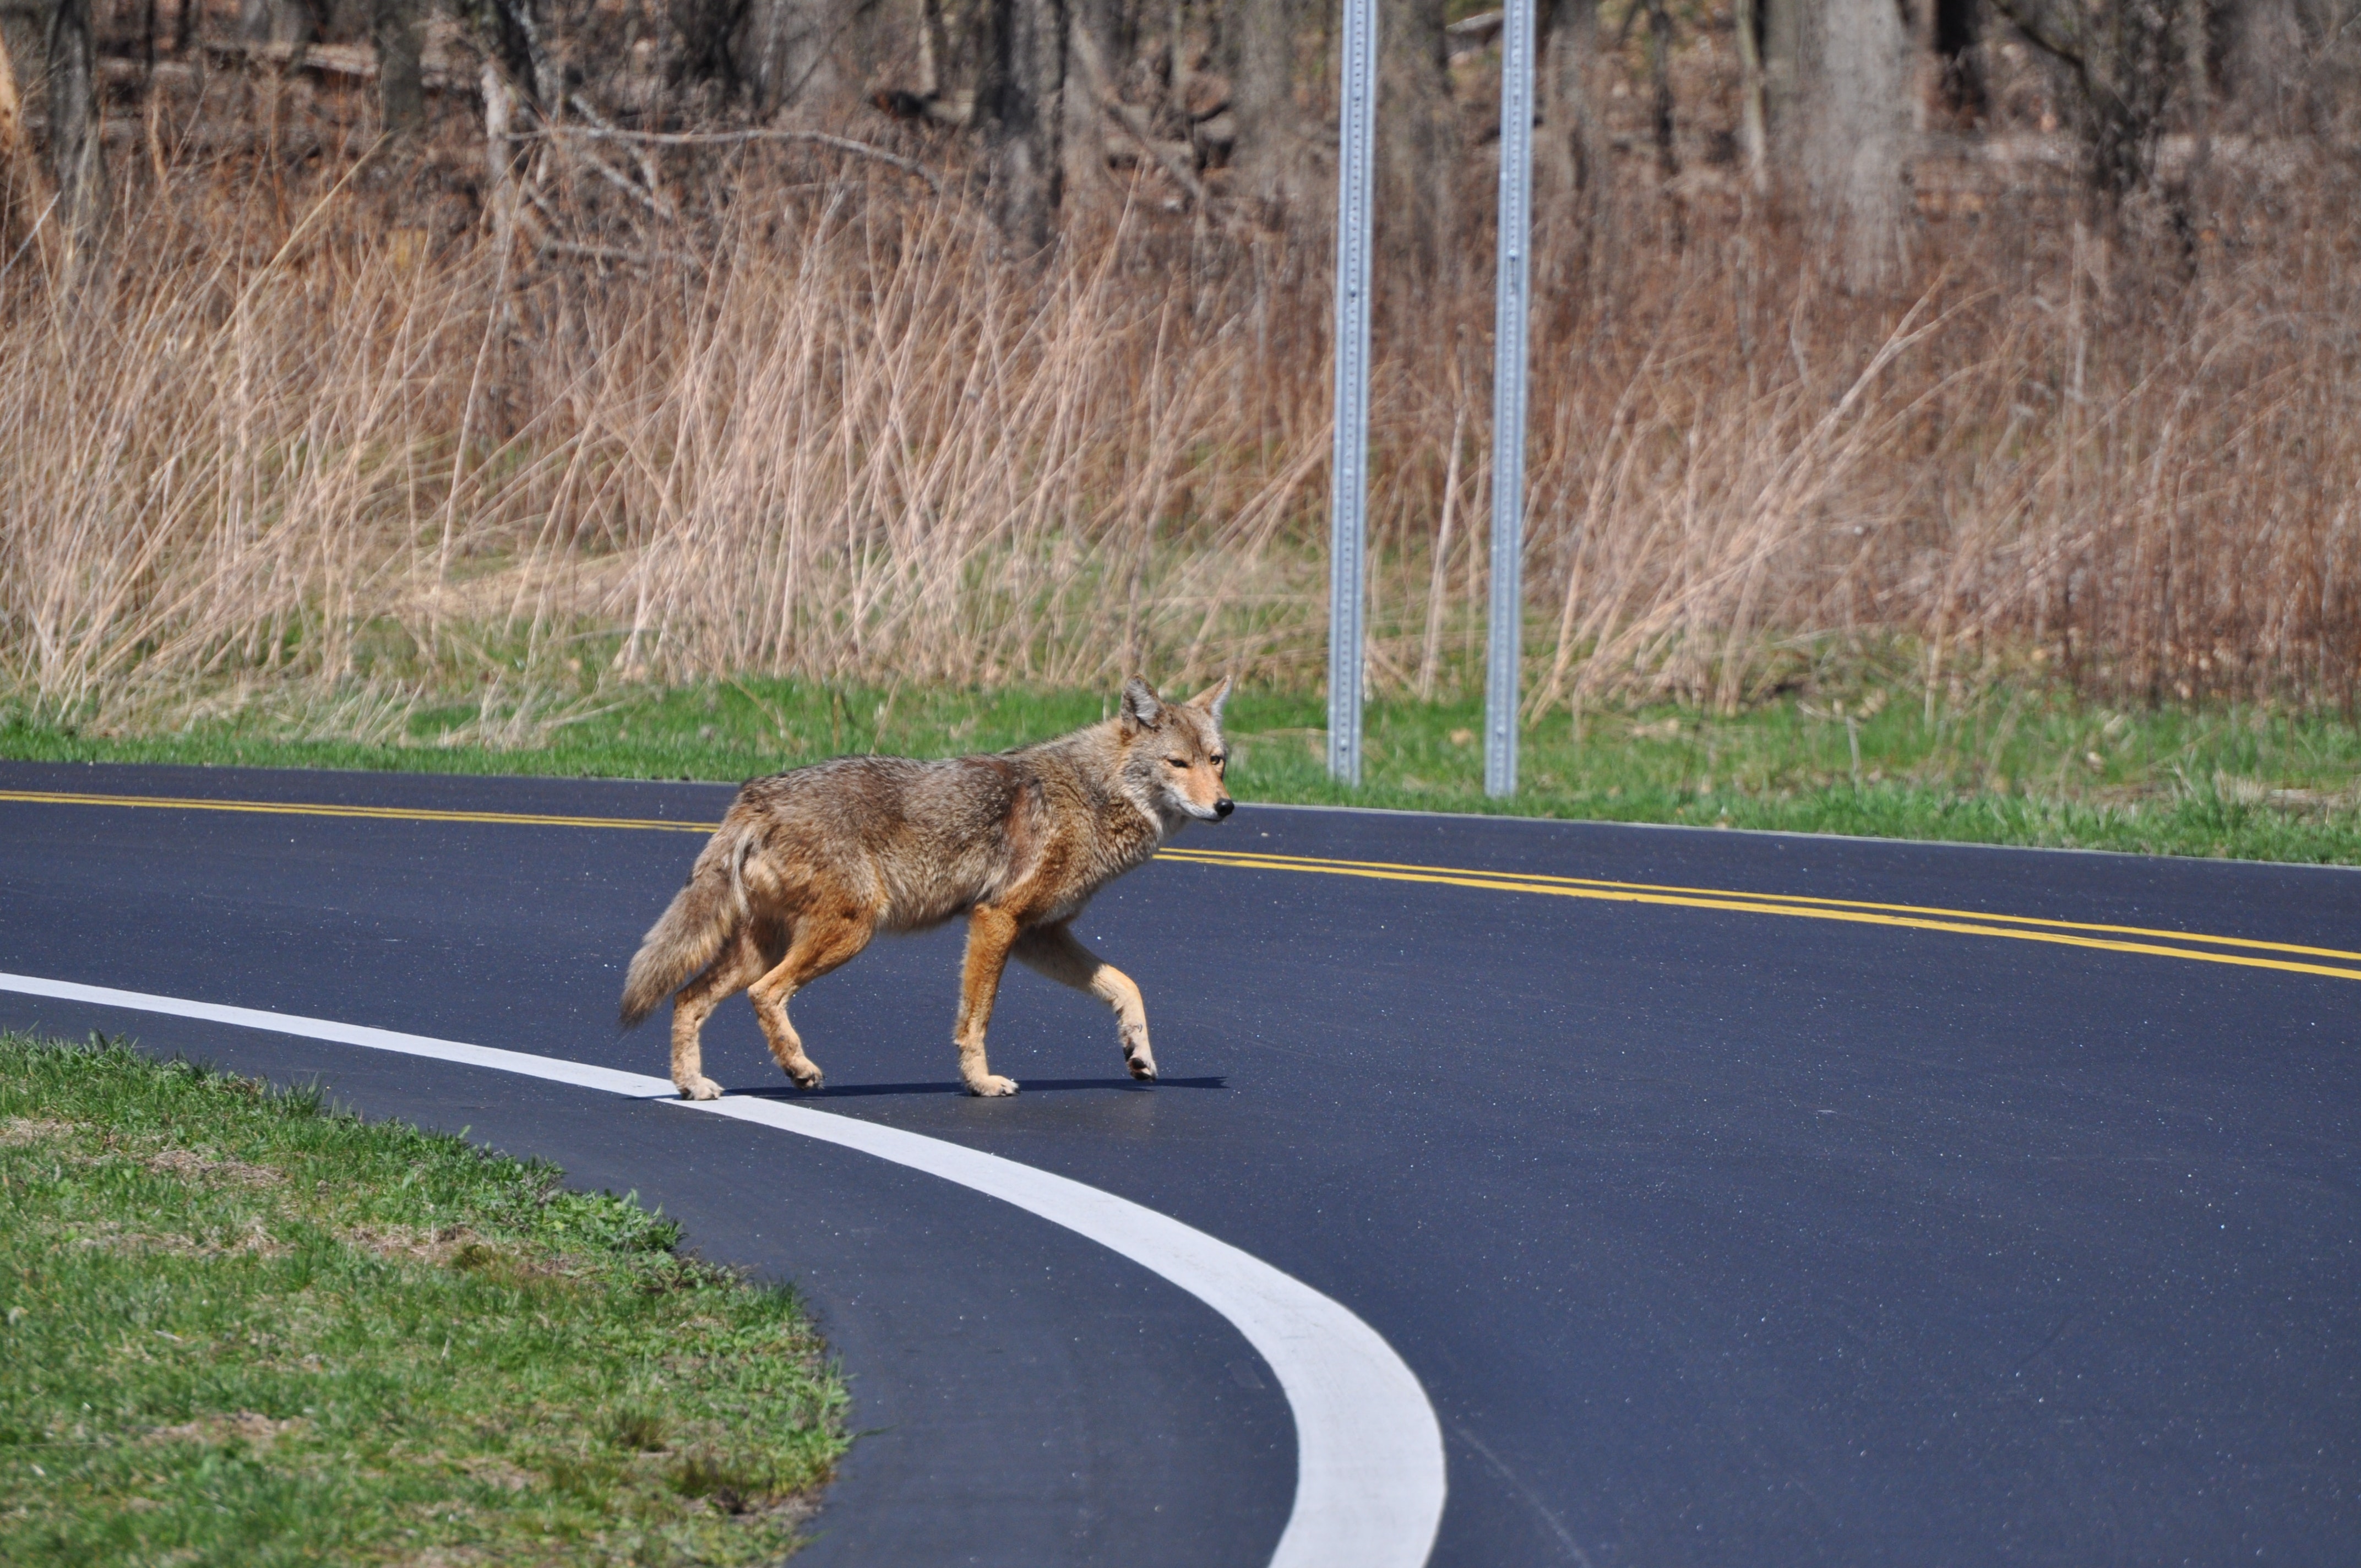 Fulvous coyote crossing a curving road